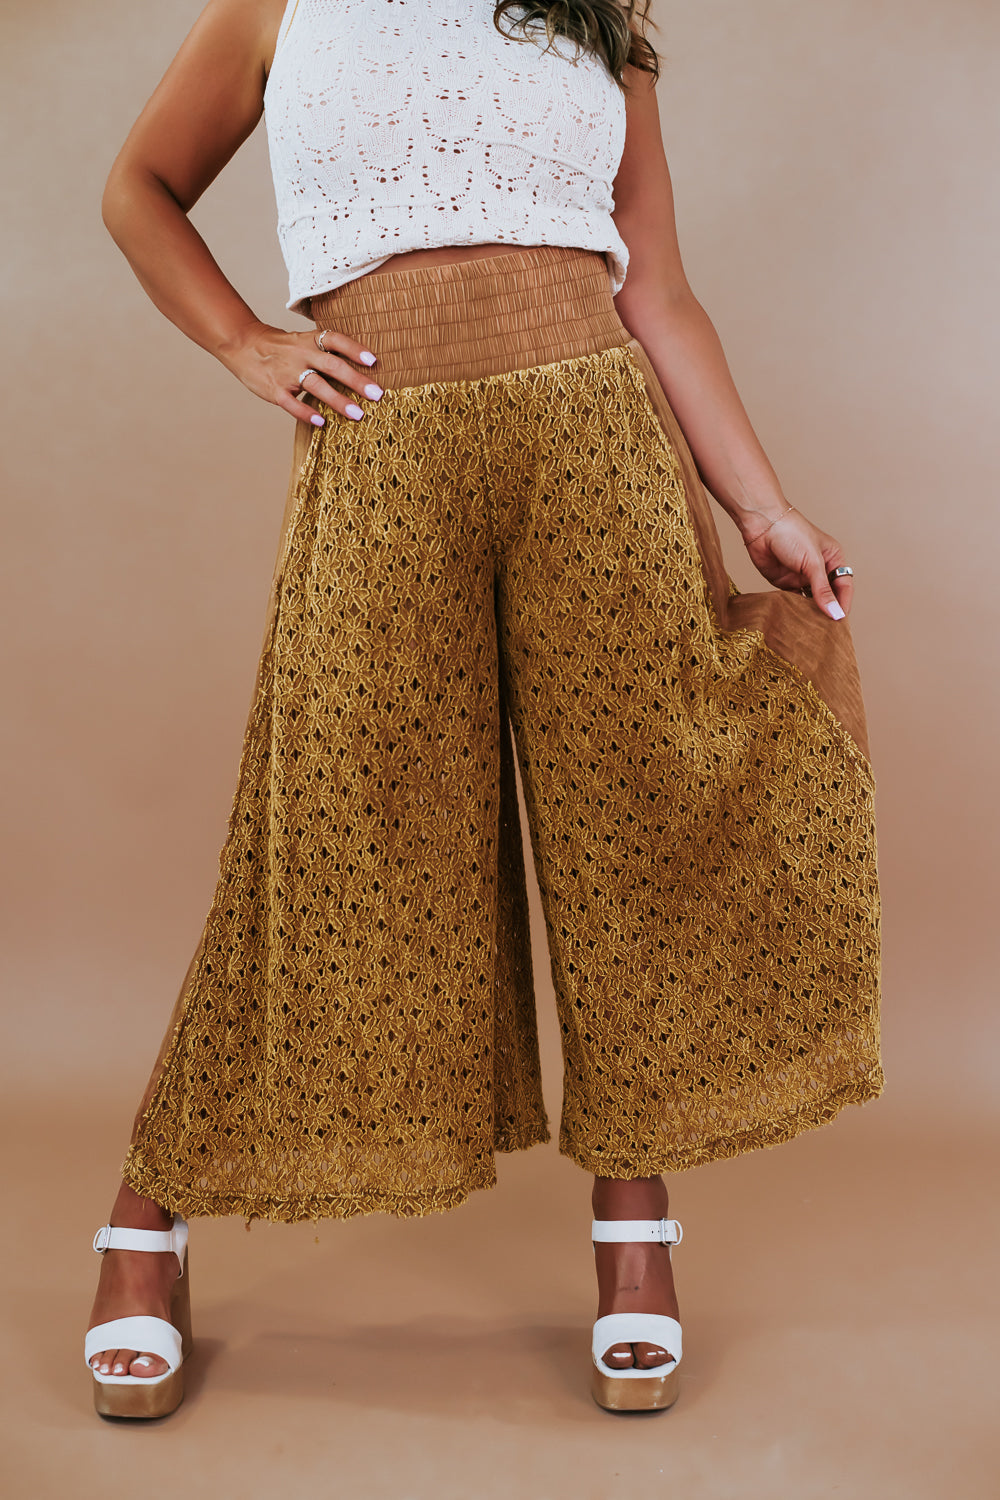 Mineral washed lace pants, mineral washed pants, Lace wide leg pants, Boho spring outfit inspo, patchwork pants, vintage outfit inspo